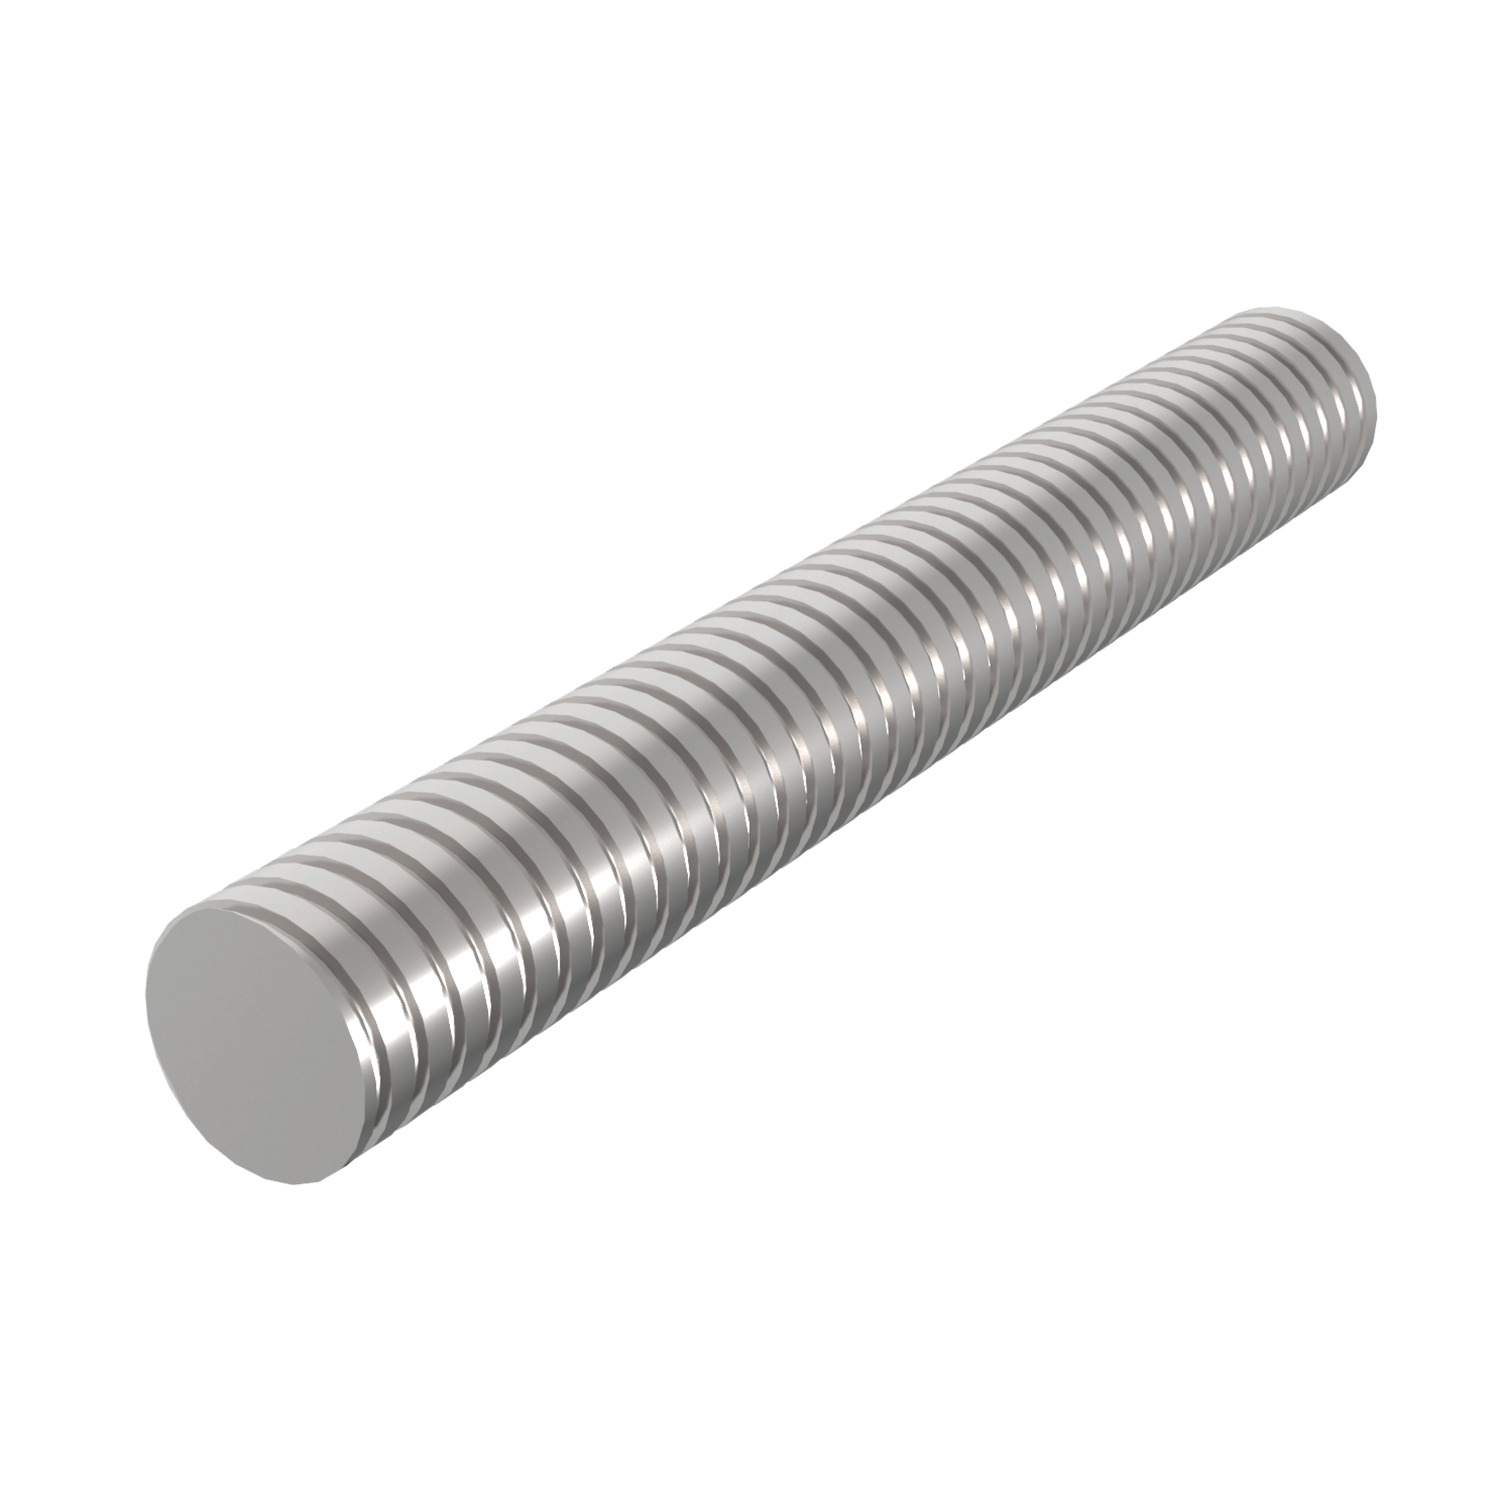 Stainless Lead Screws Stainless steel trapezoidal lead screws (316 s/s). TR threads 10 to 70mm. Standard right hand threads.